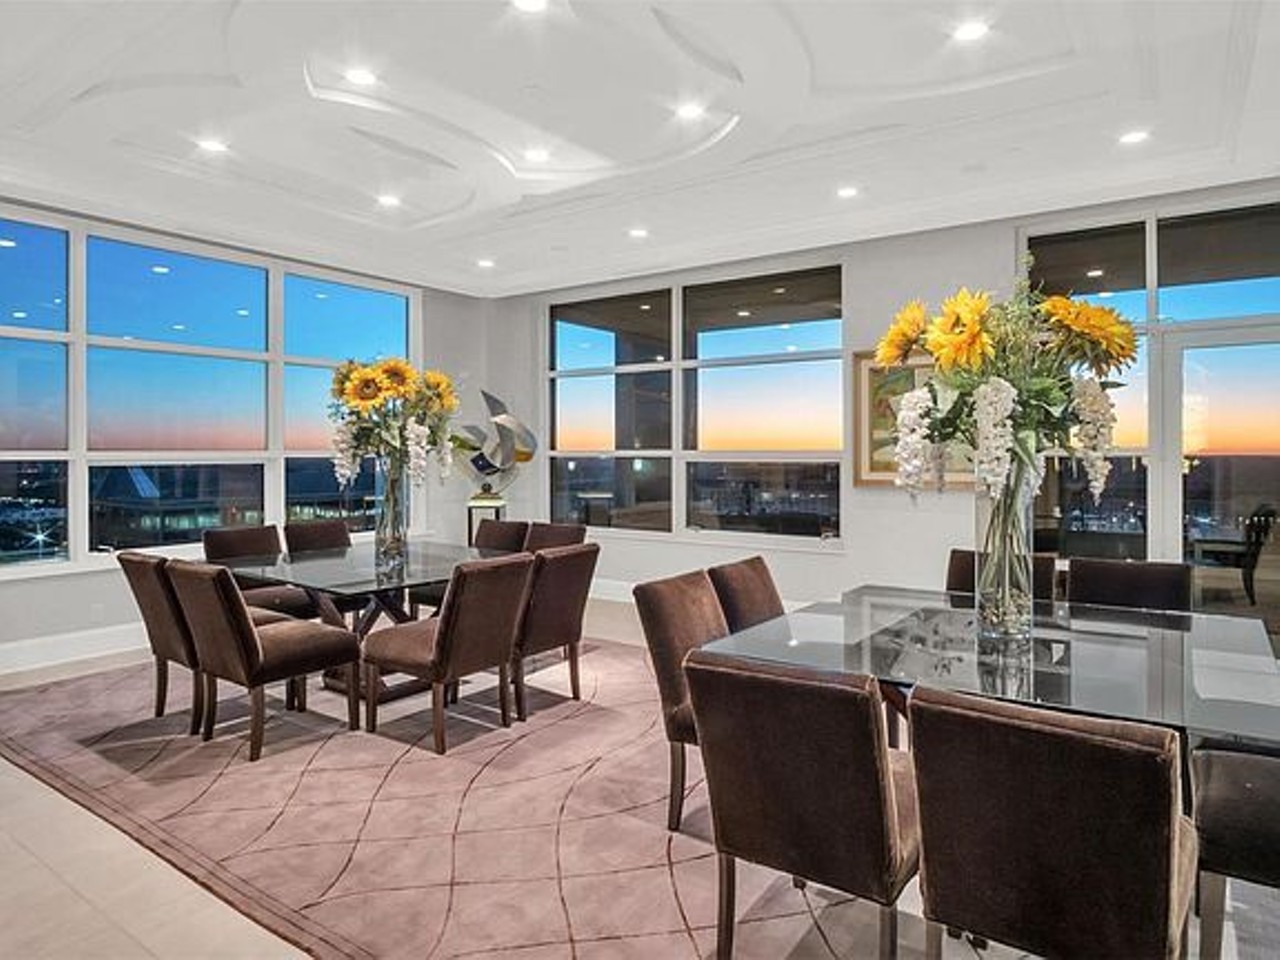 The Most Expensive Apartment on the Market in St. Louis Has Killer Views [PHOTOS]